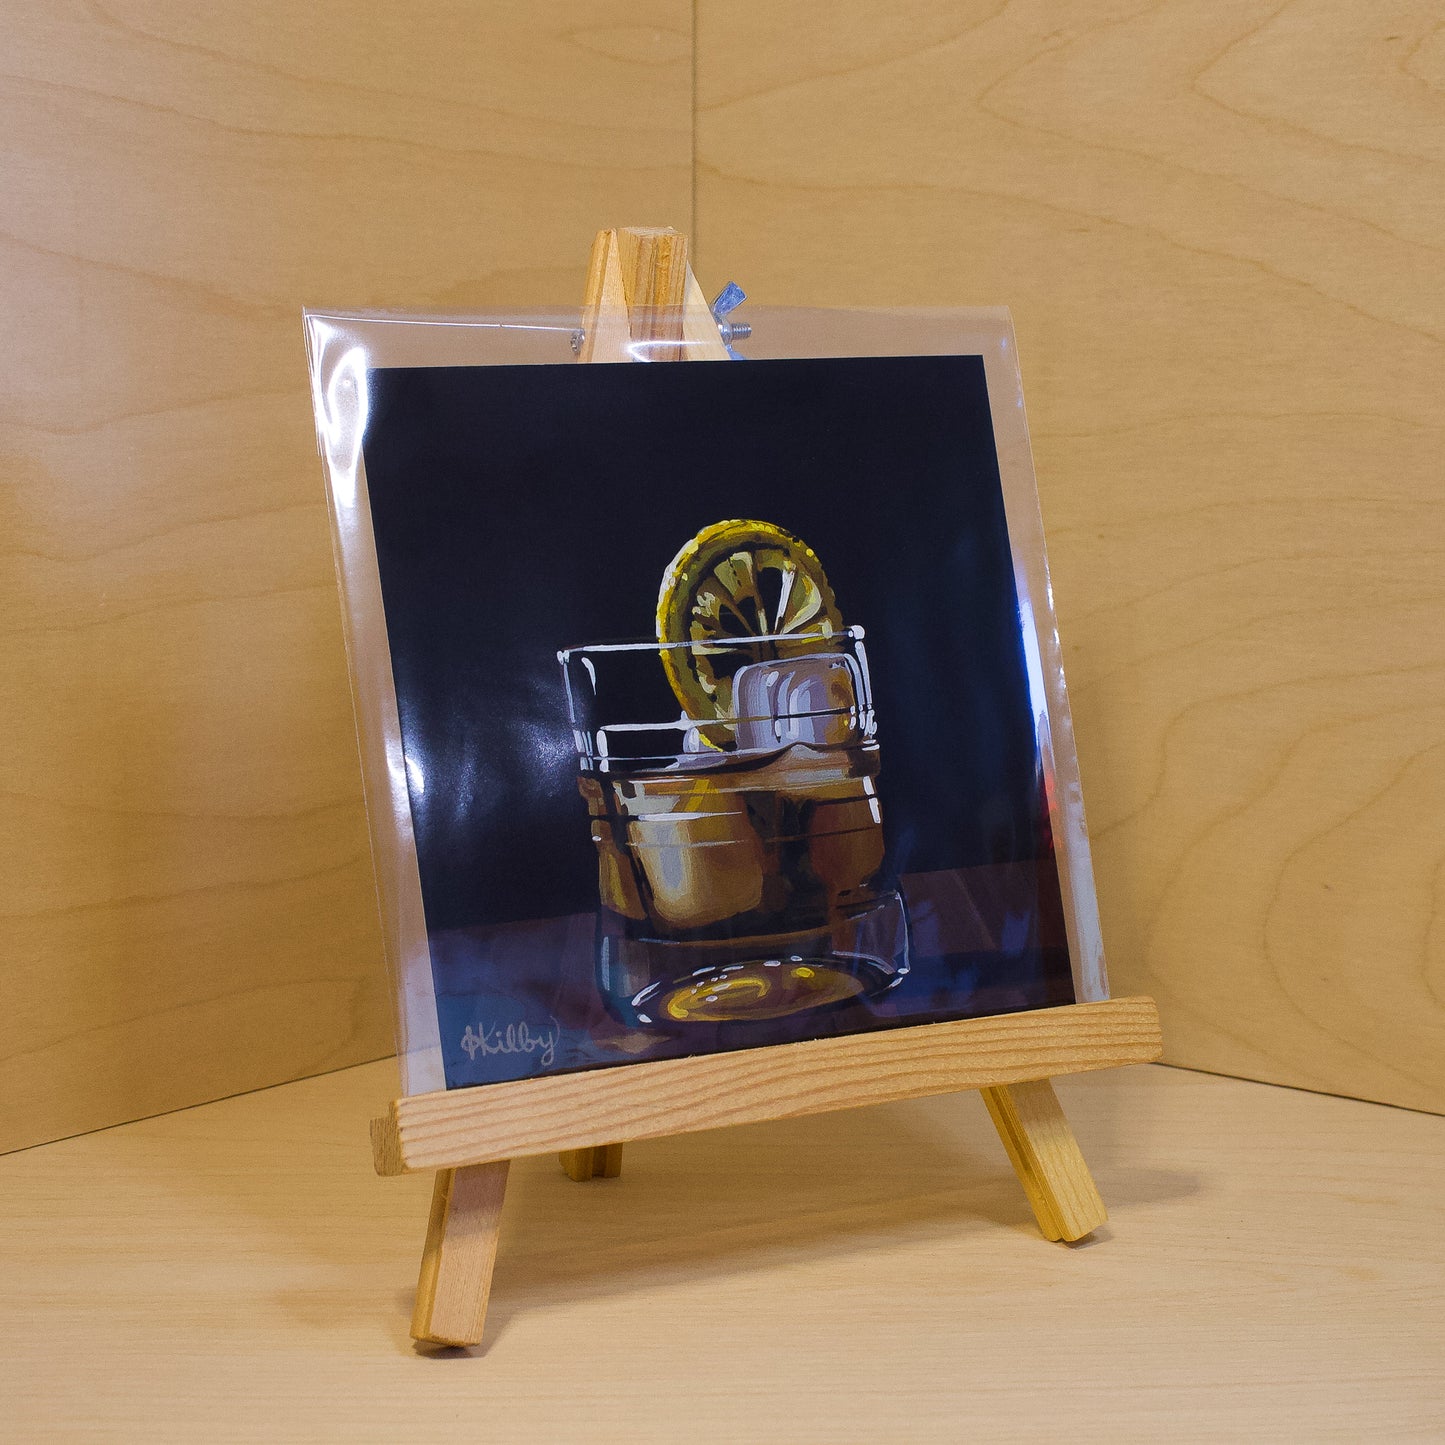 A 6x6" fine art print of the original acrylic painting "Old Fashioned" by Hannah Kilby from Hannah Michelle Studios. Displayed in a protective plastic sleeve on a small, wooden easel.